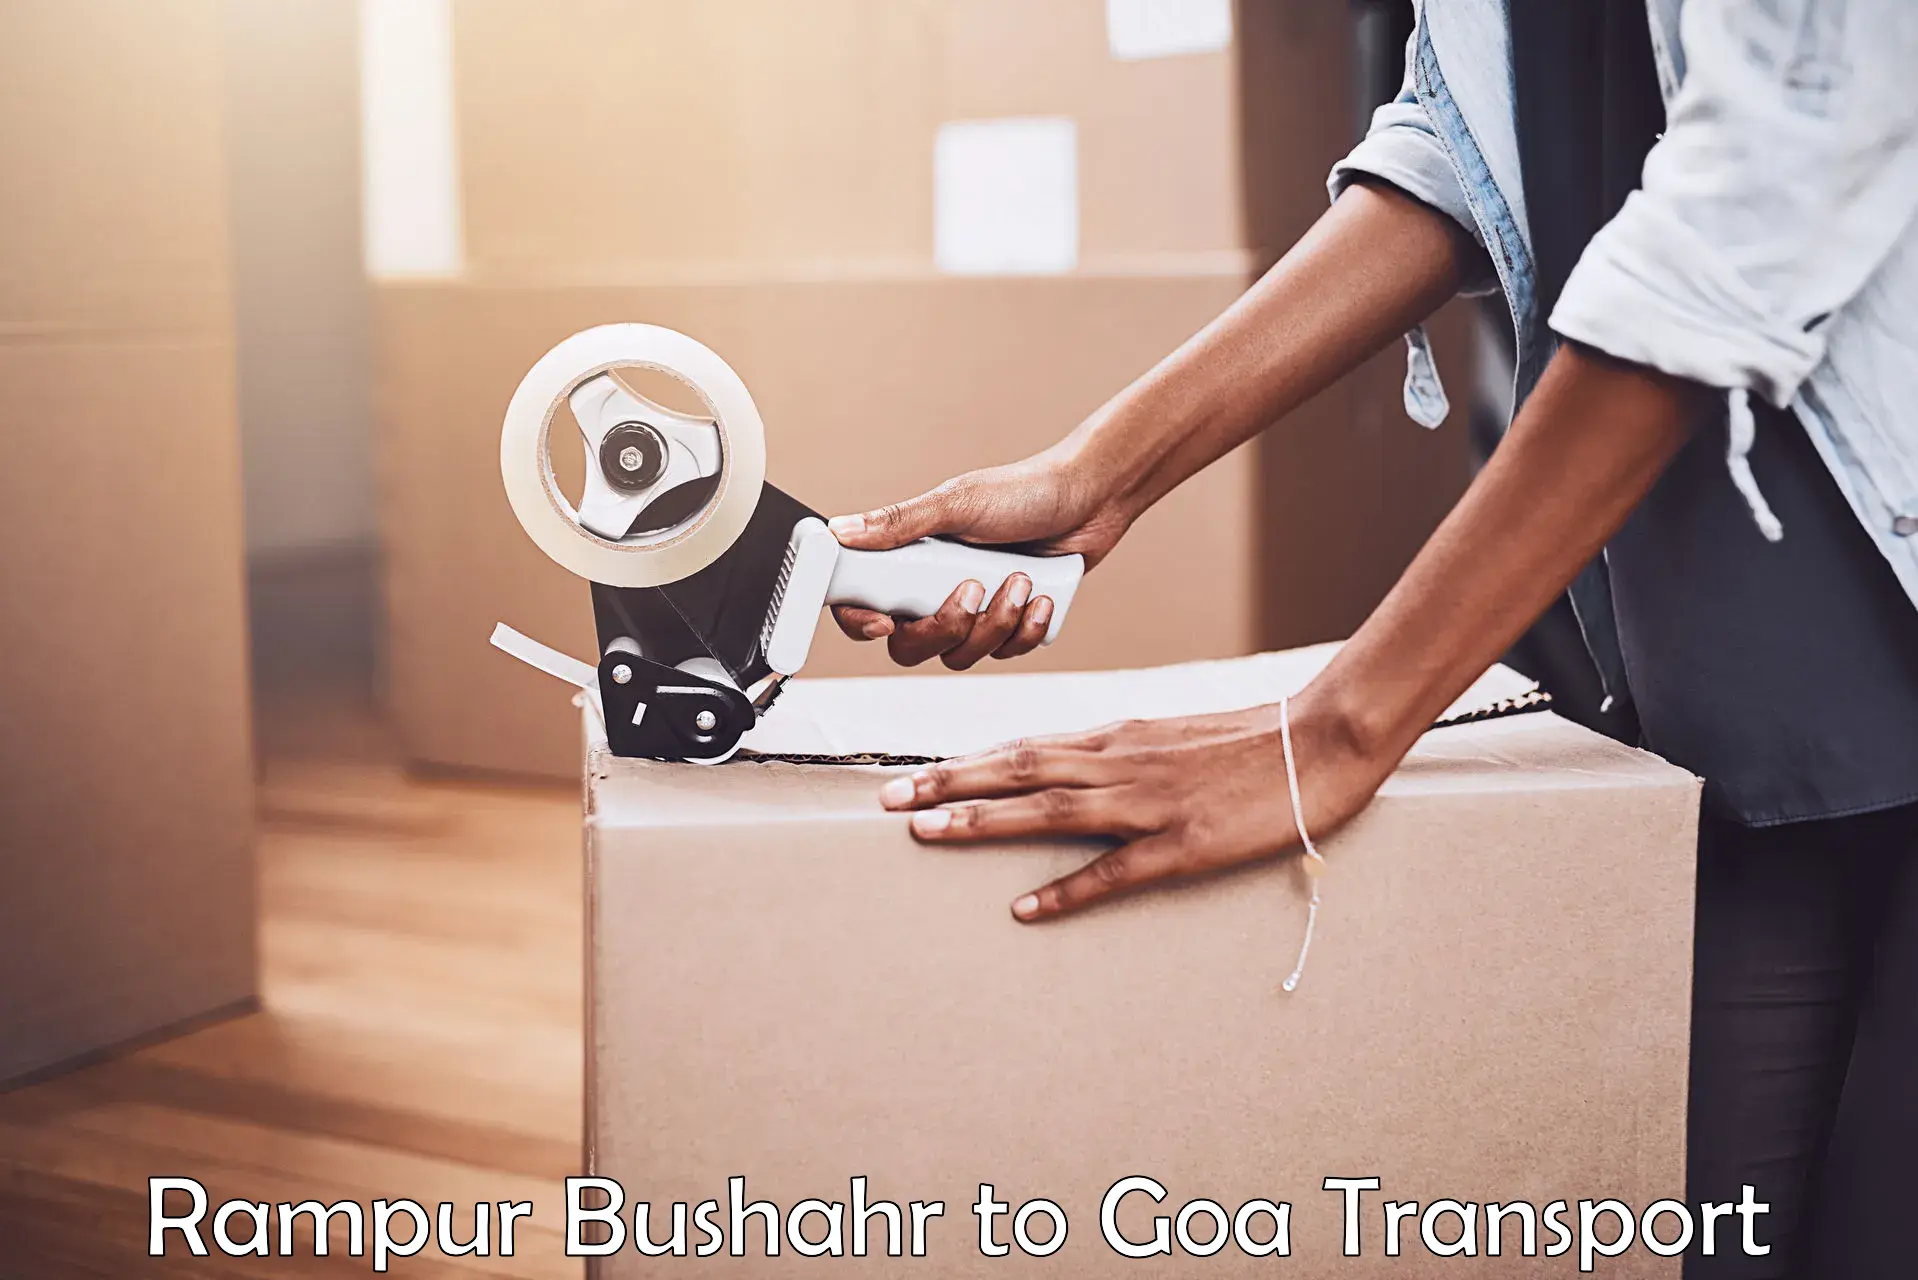 Goods delivery service Rampur Bushahr to Margao